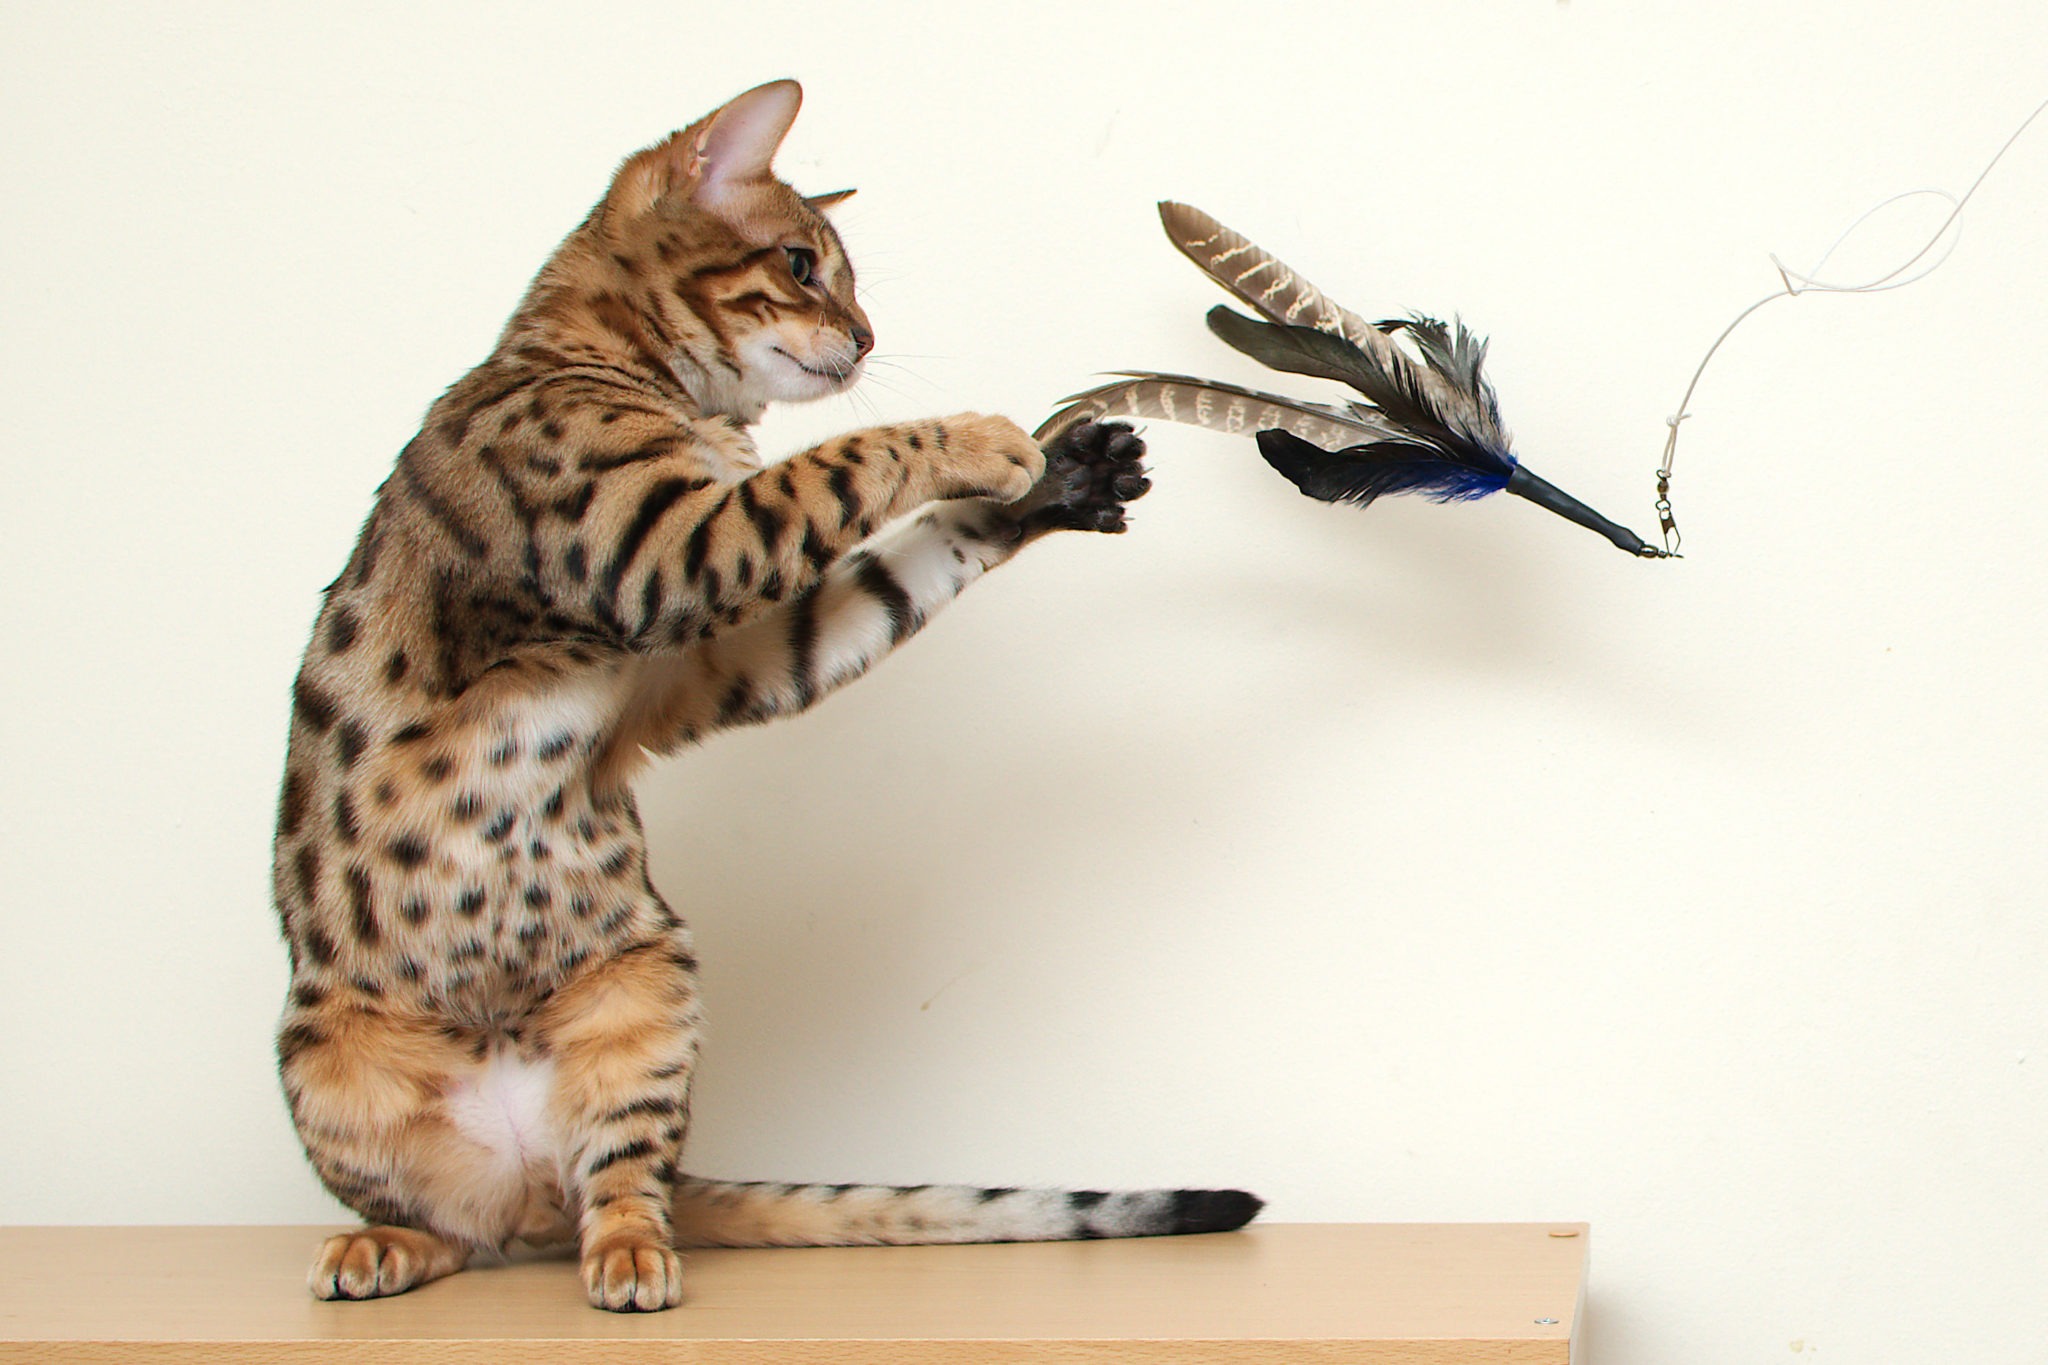 Animals___Cats__Young_Bengal_cat_playing_044840_